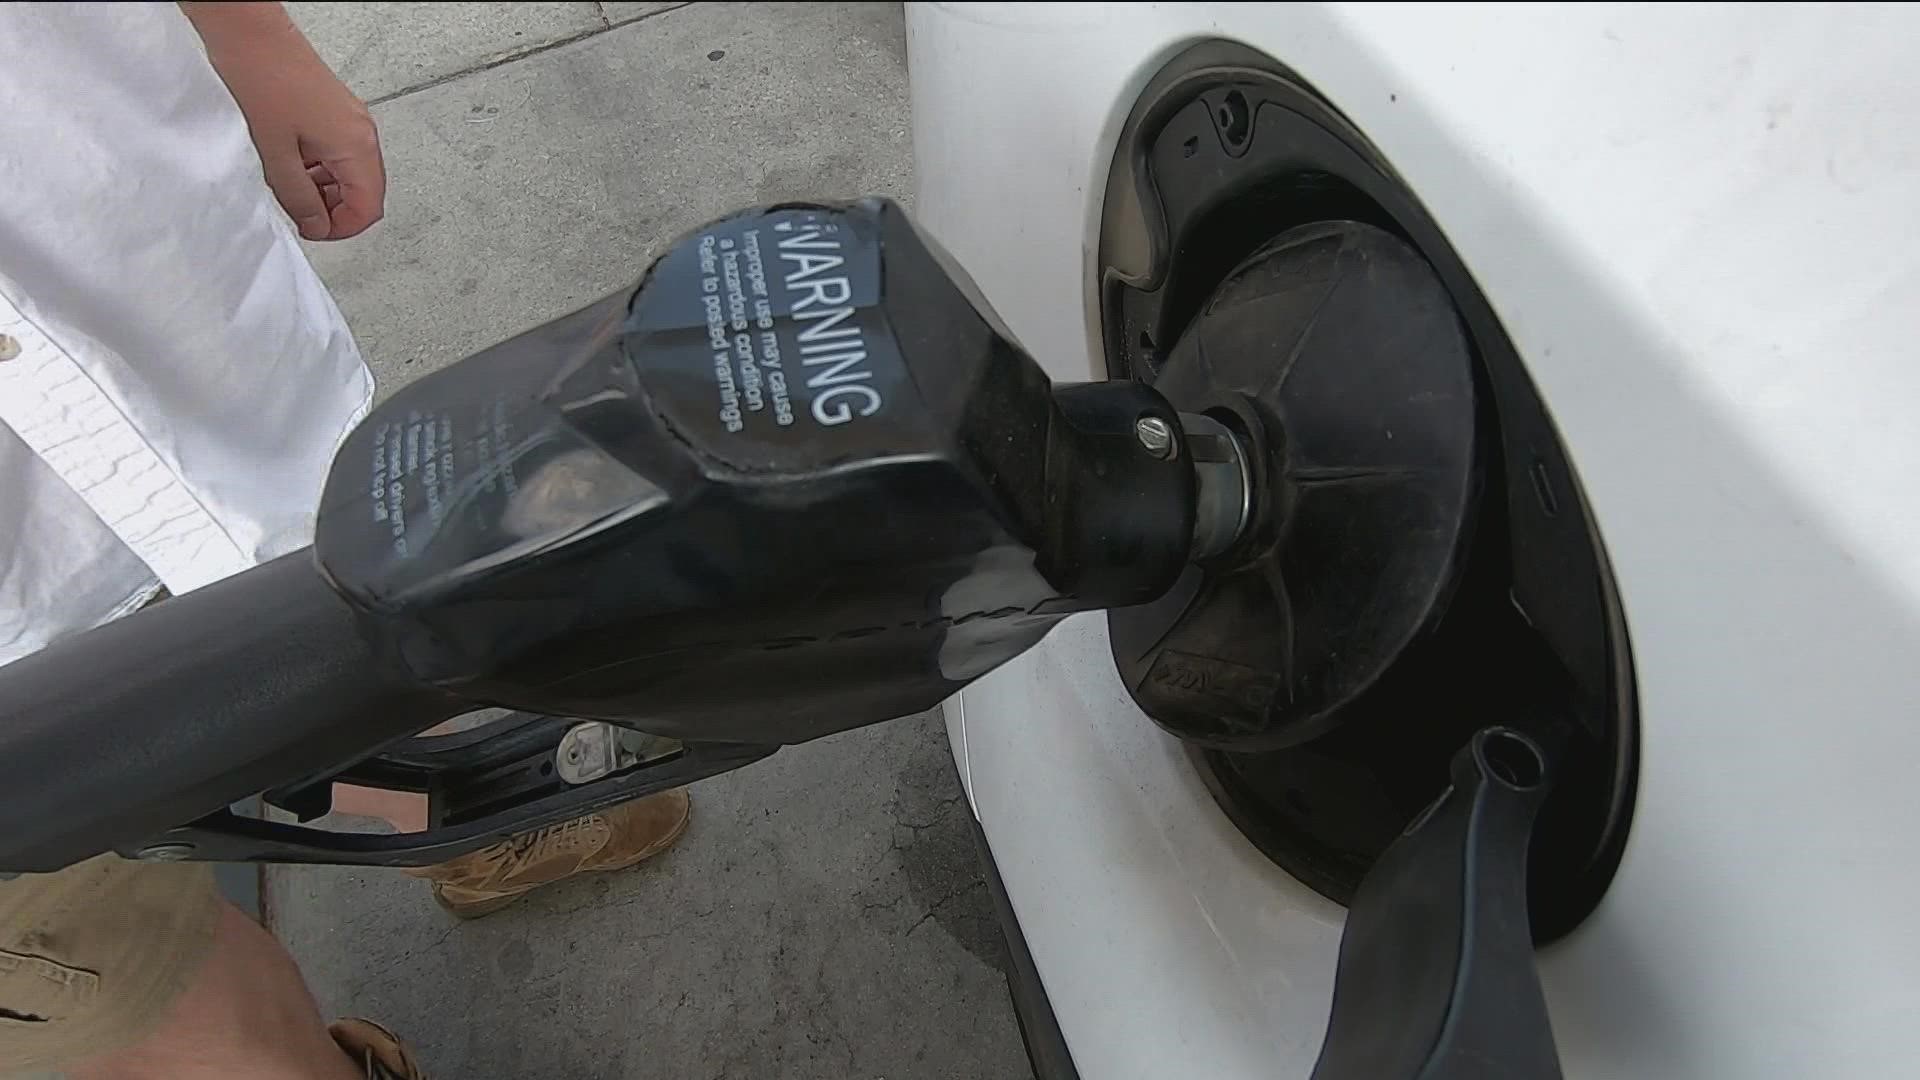 The average price in Boise has fallen 15.8 cents in the last week to $4.94 per gallon, according to GasBuddy, but is still much higher than a year ago.